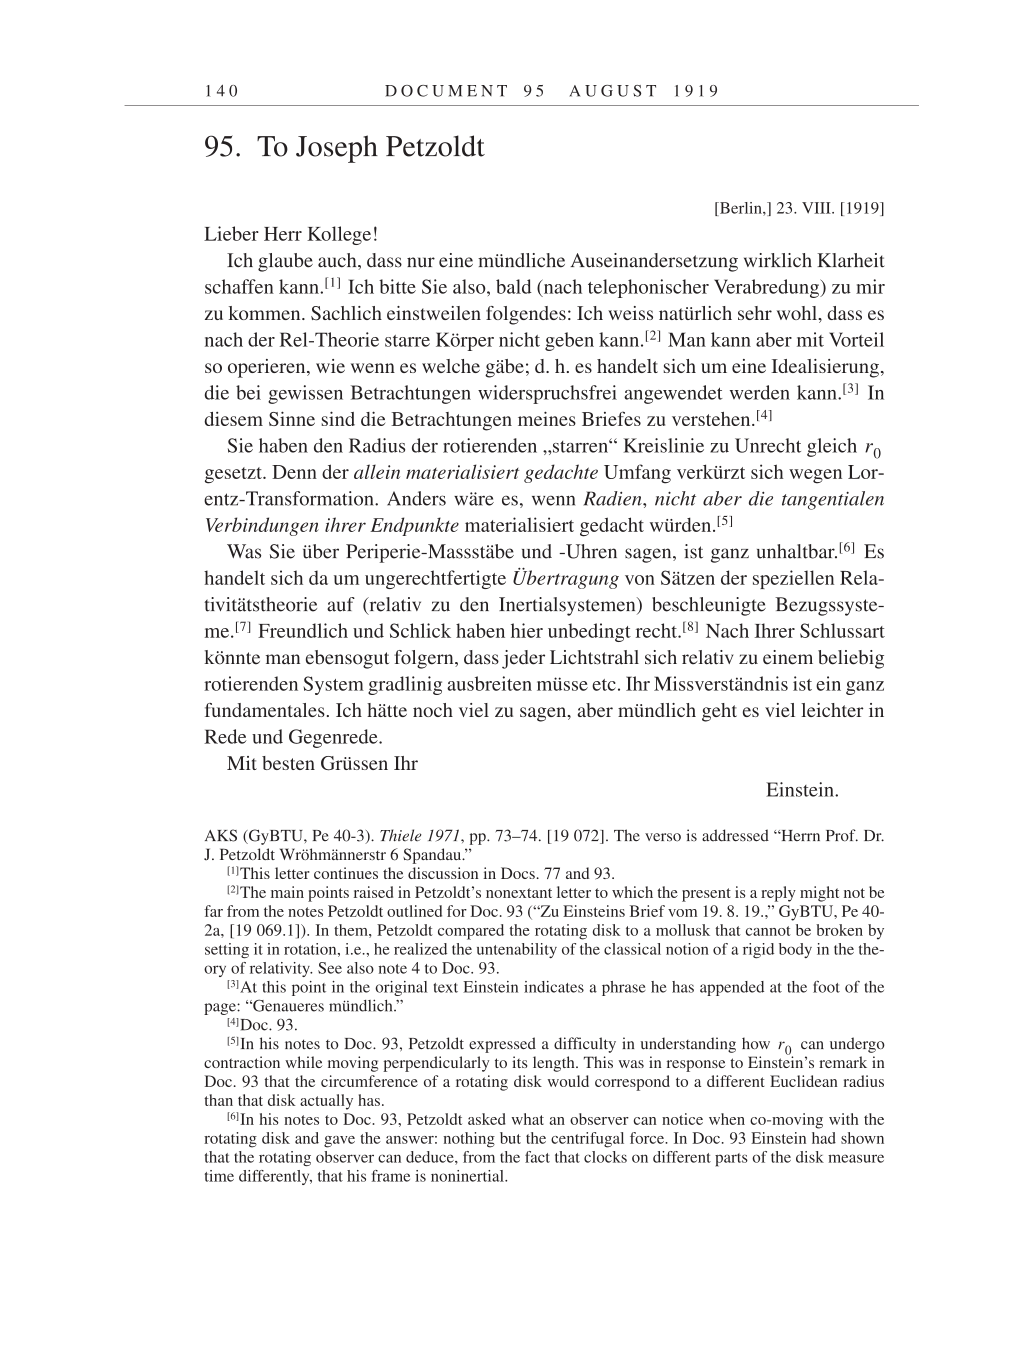 Volume 9: The Berlin Years: Correspondence January 1919-April 1920 page 140